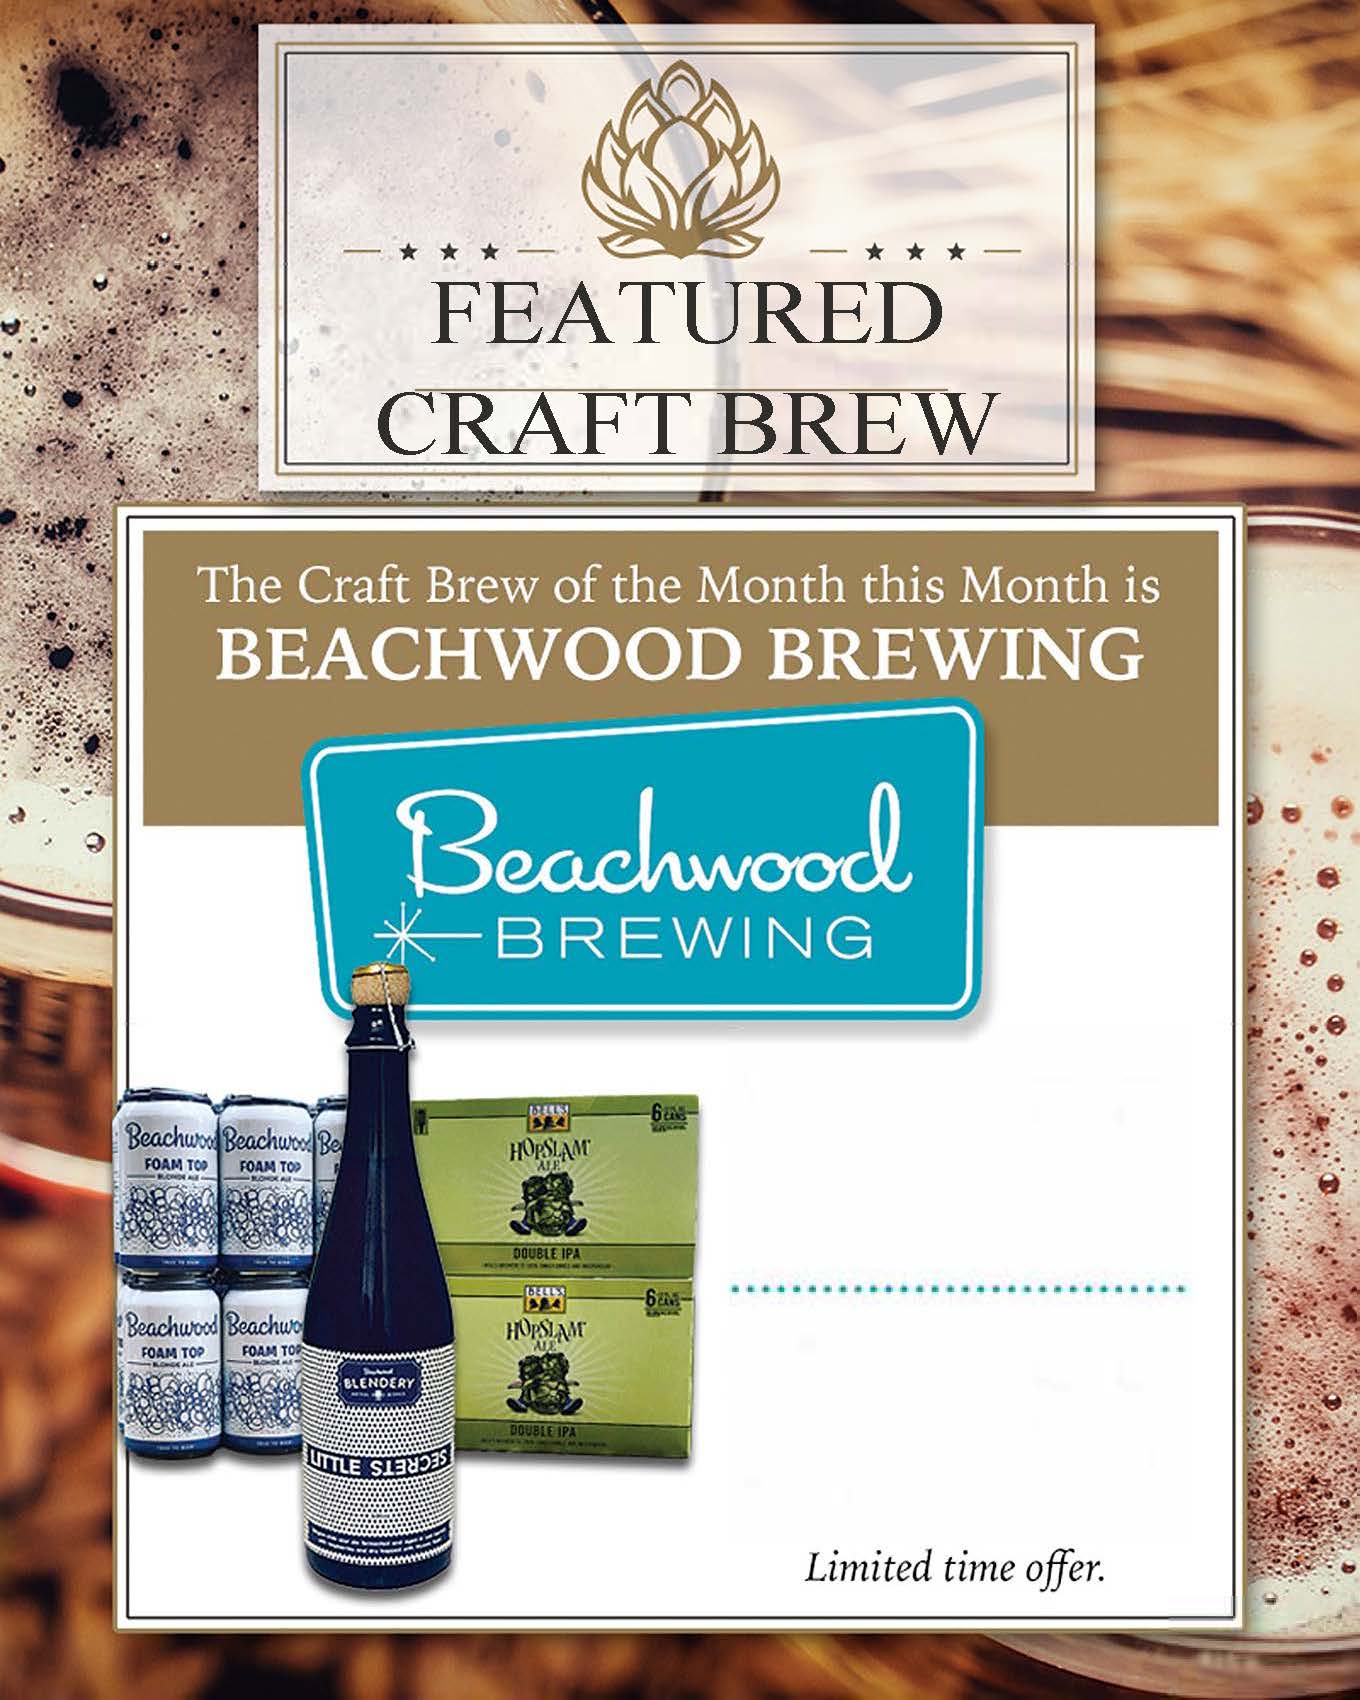 Beachwood Brewing Company's Beers Can Be Found @ El Toro Gourmet Meats In Lake Forest, CA.